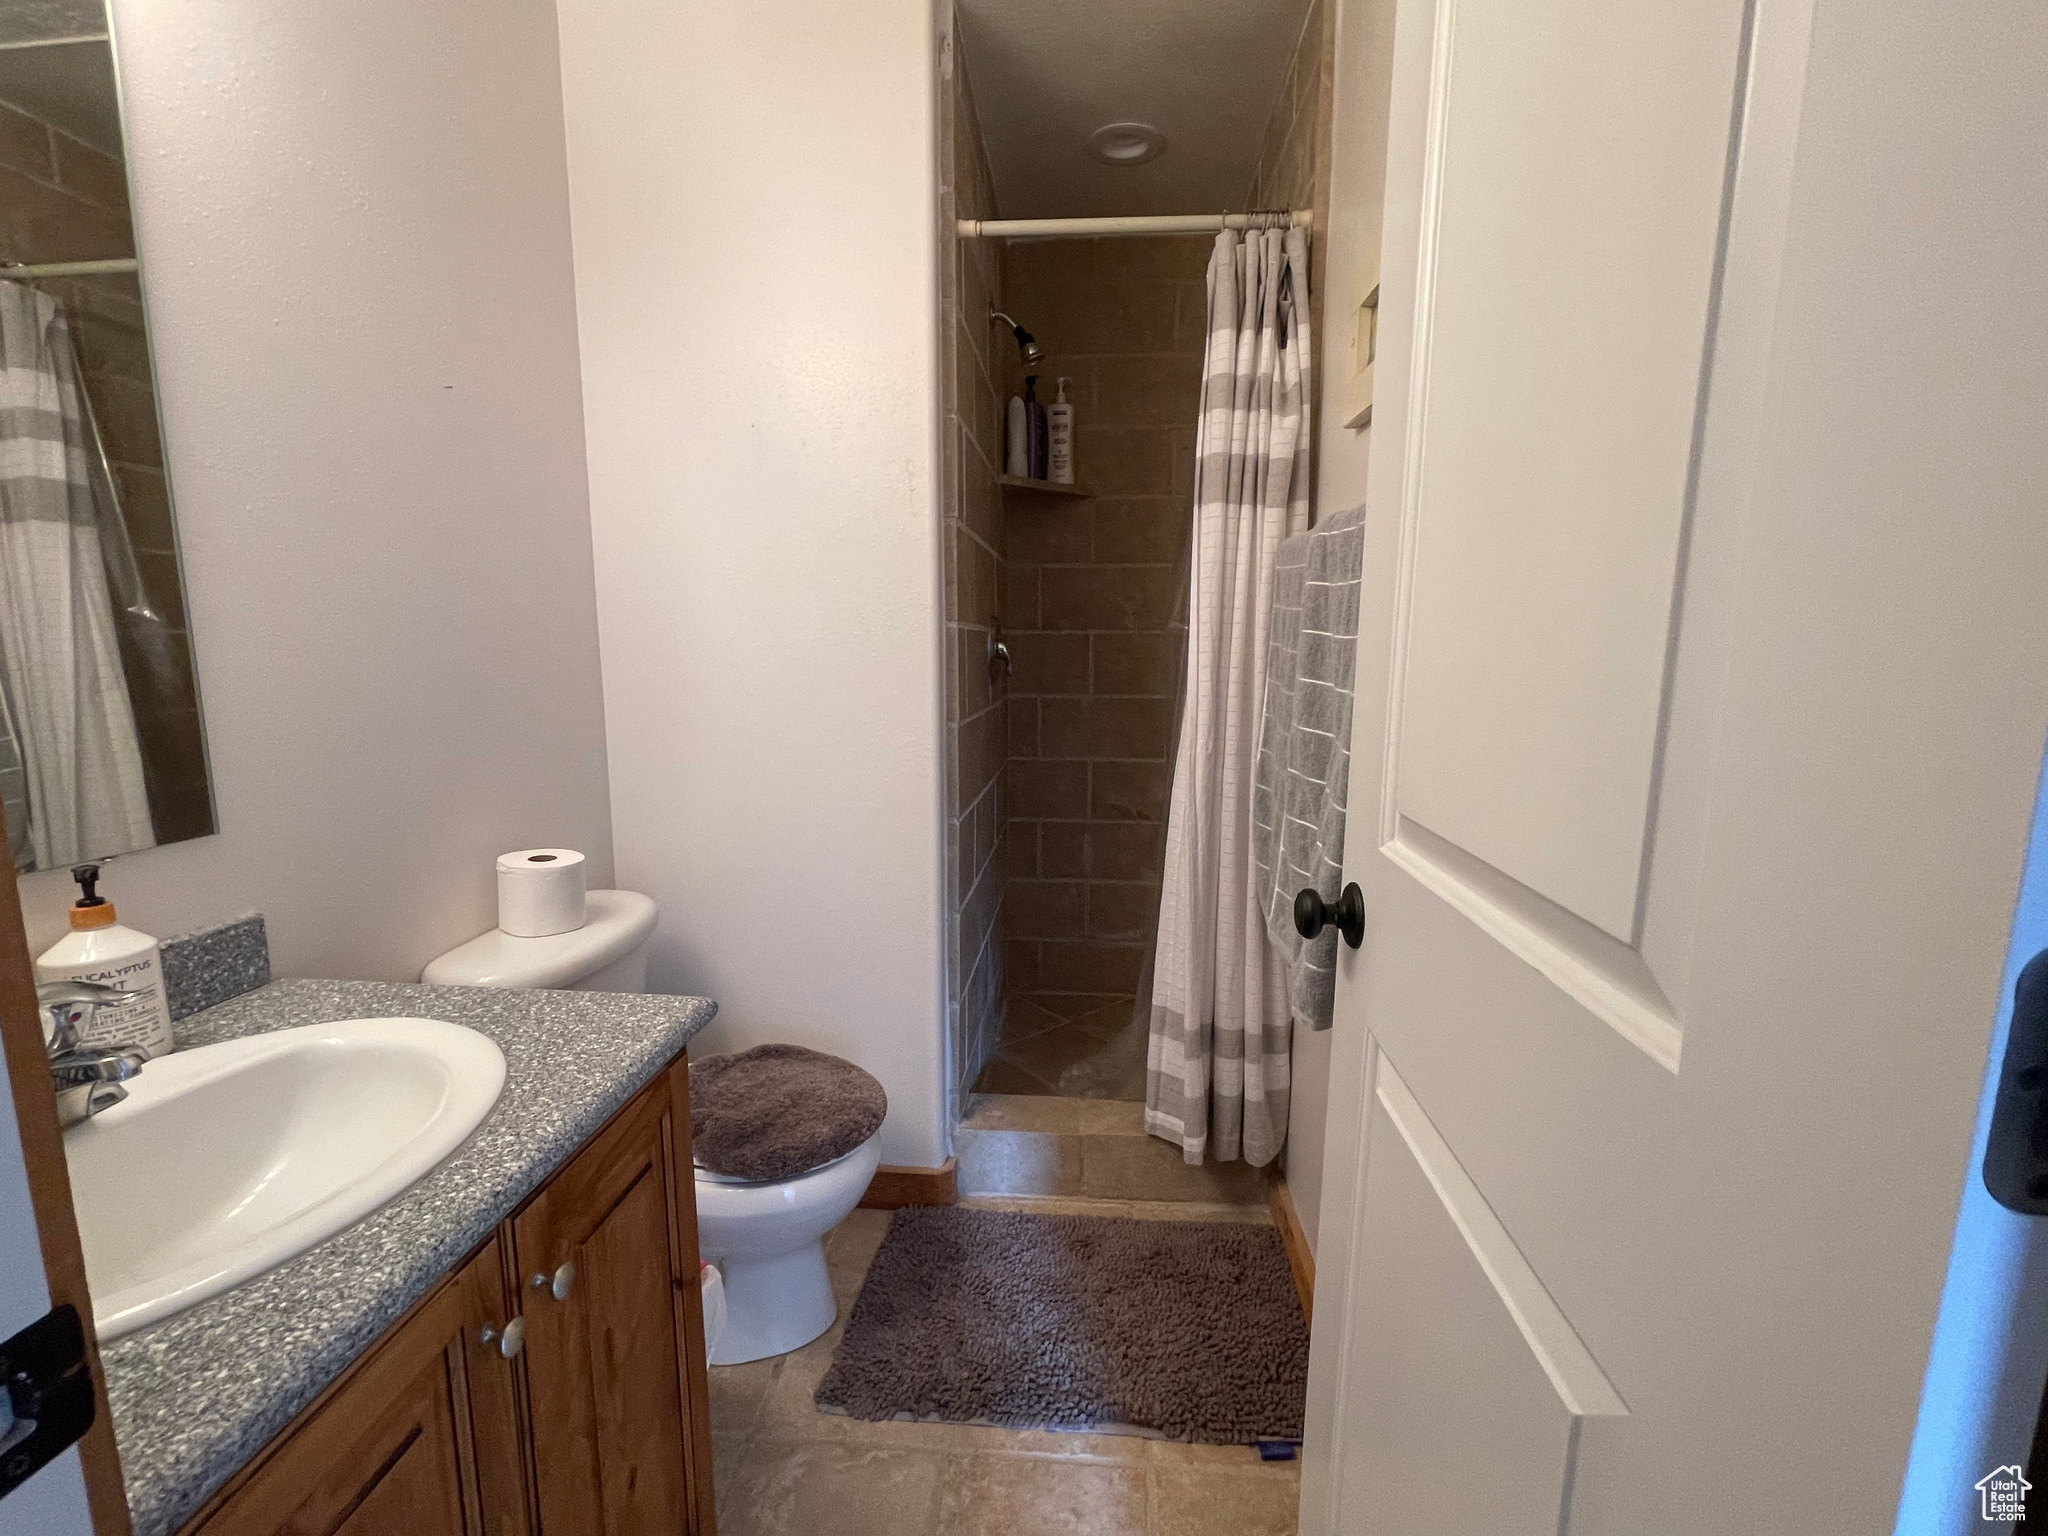 Bathroom featuring tile floors, toilet, a shower with curtain, and vanity